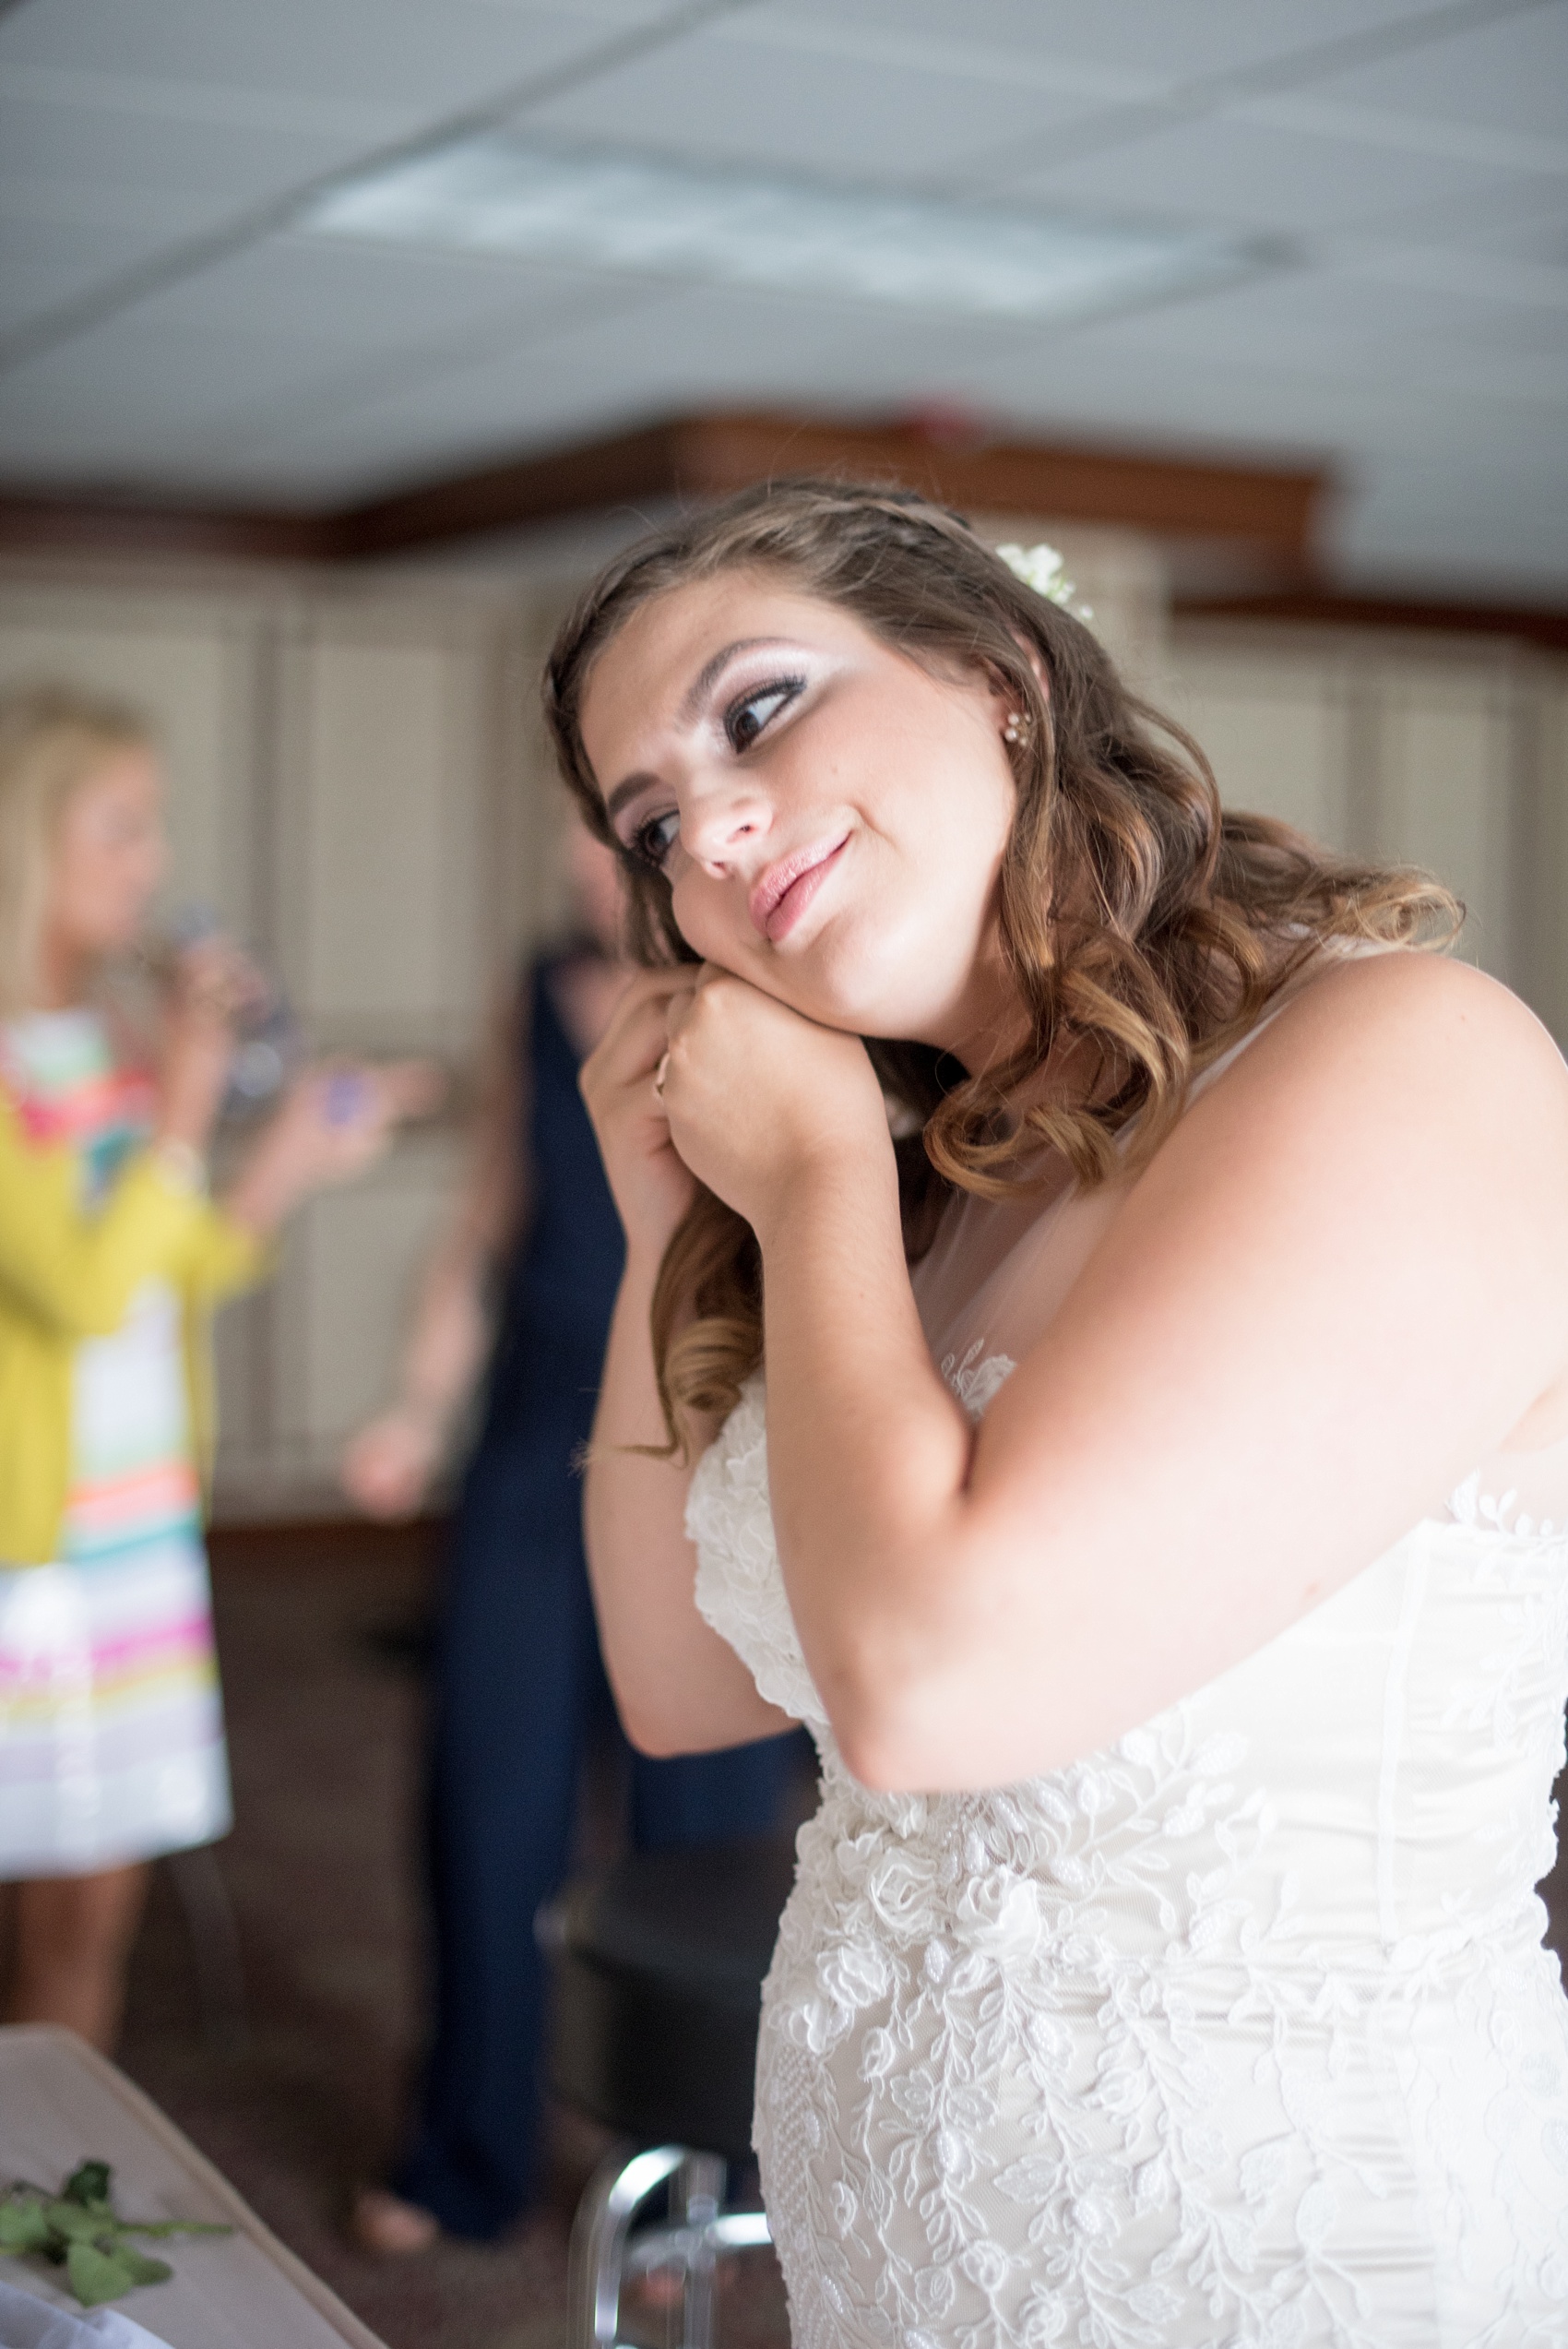 Mikkel Paige Photography photo of a wedding at the Madison Hotel in NJ. Image of the bride getting ready.